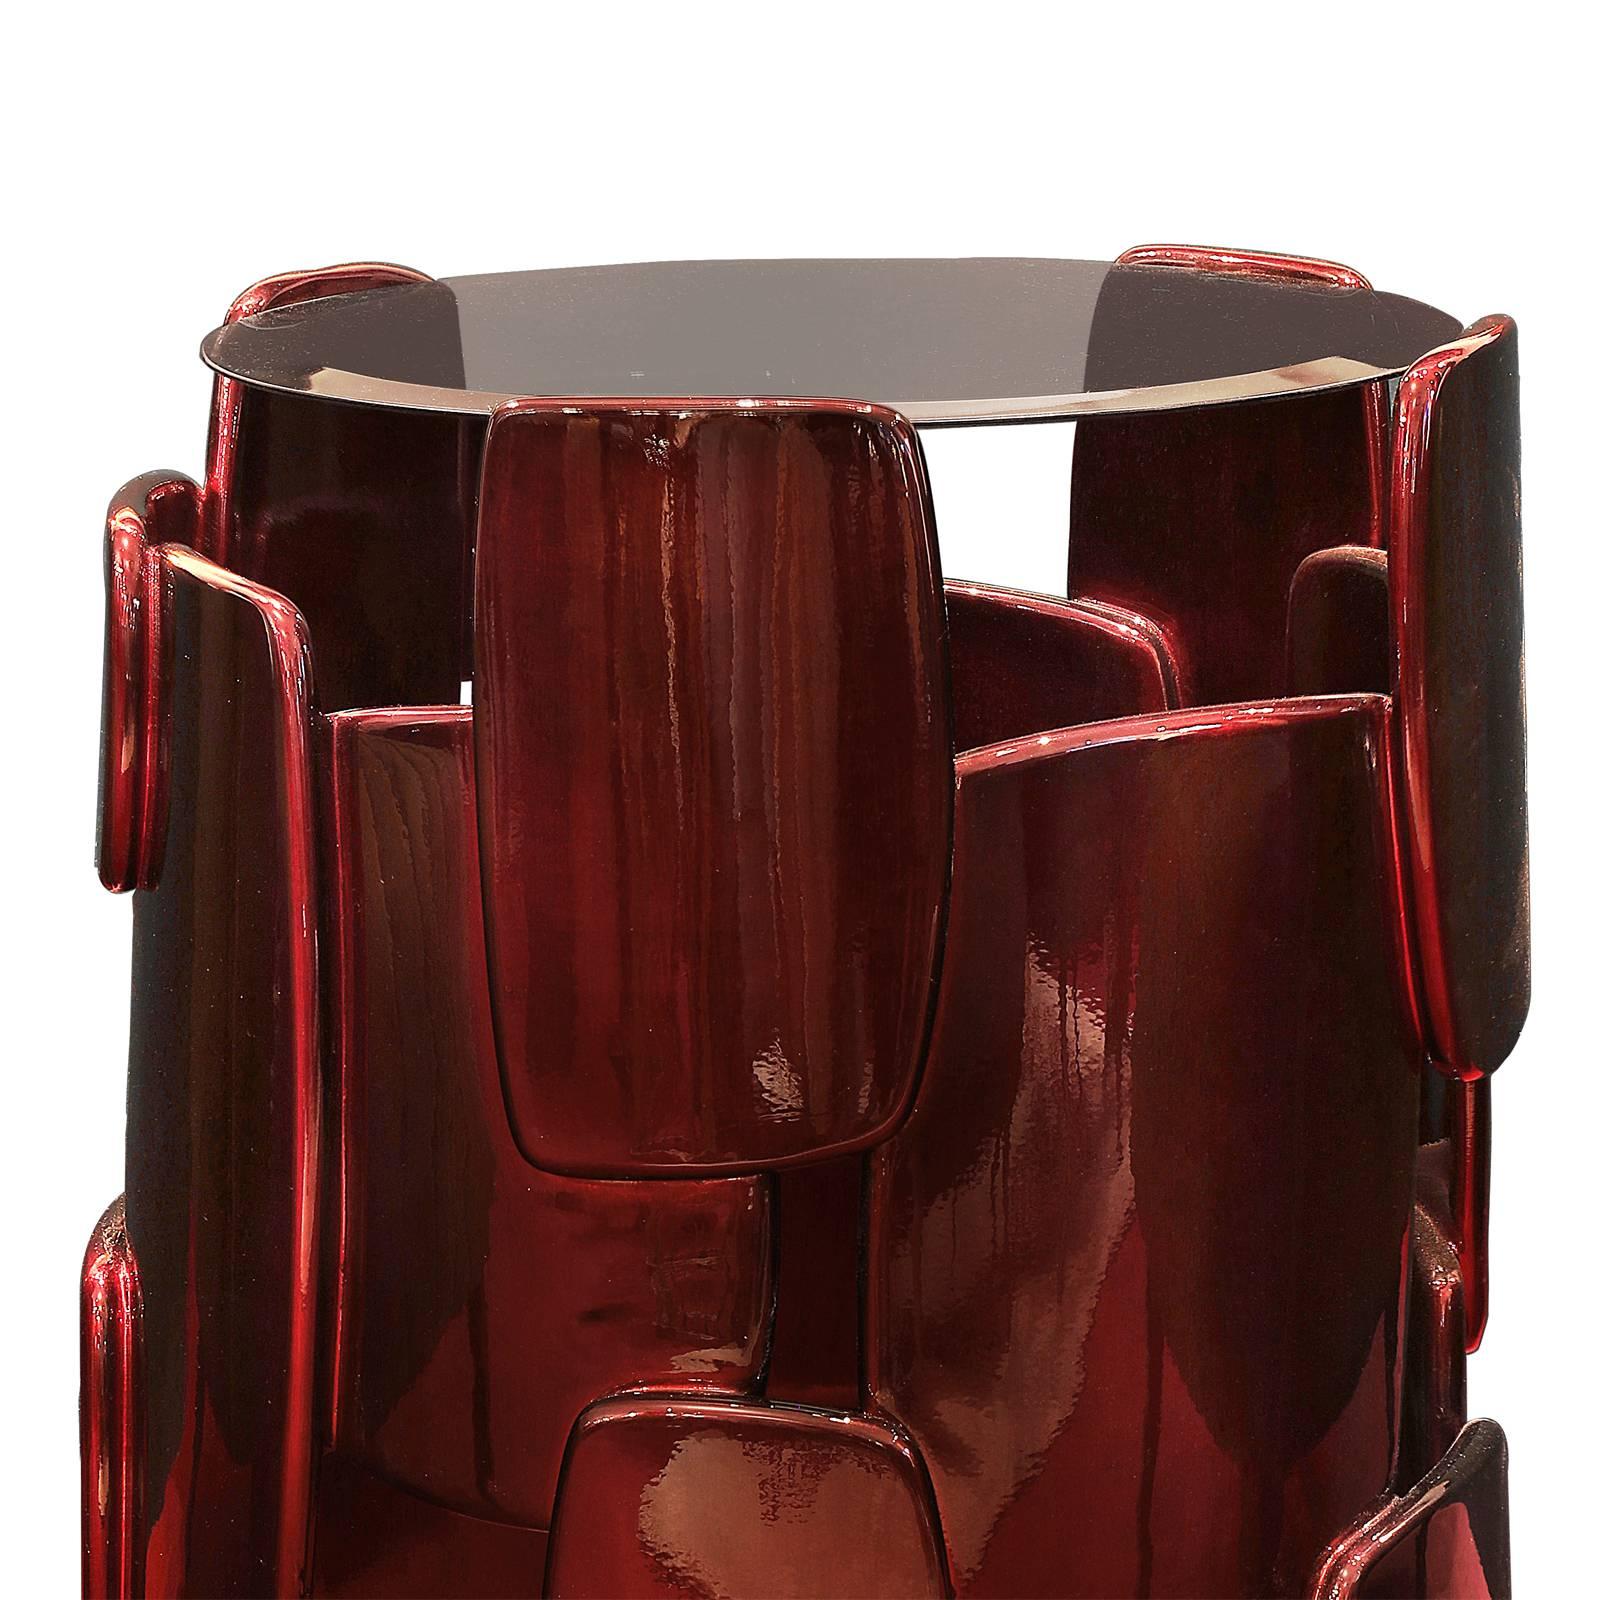 Side table brazero with hand-painted silver leaf
with shades of black and red glossy varnished.
With smoked glass top.
